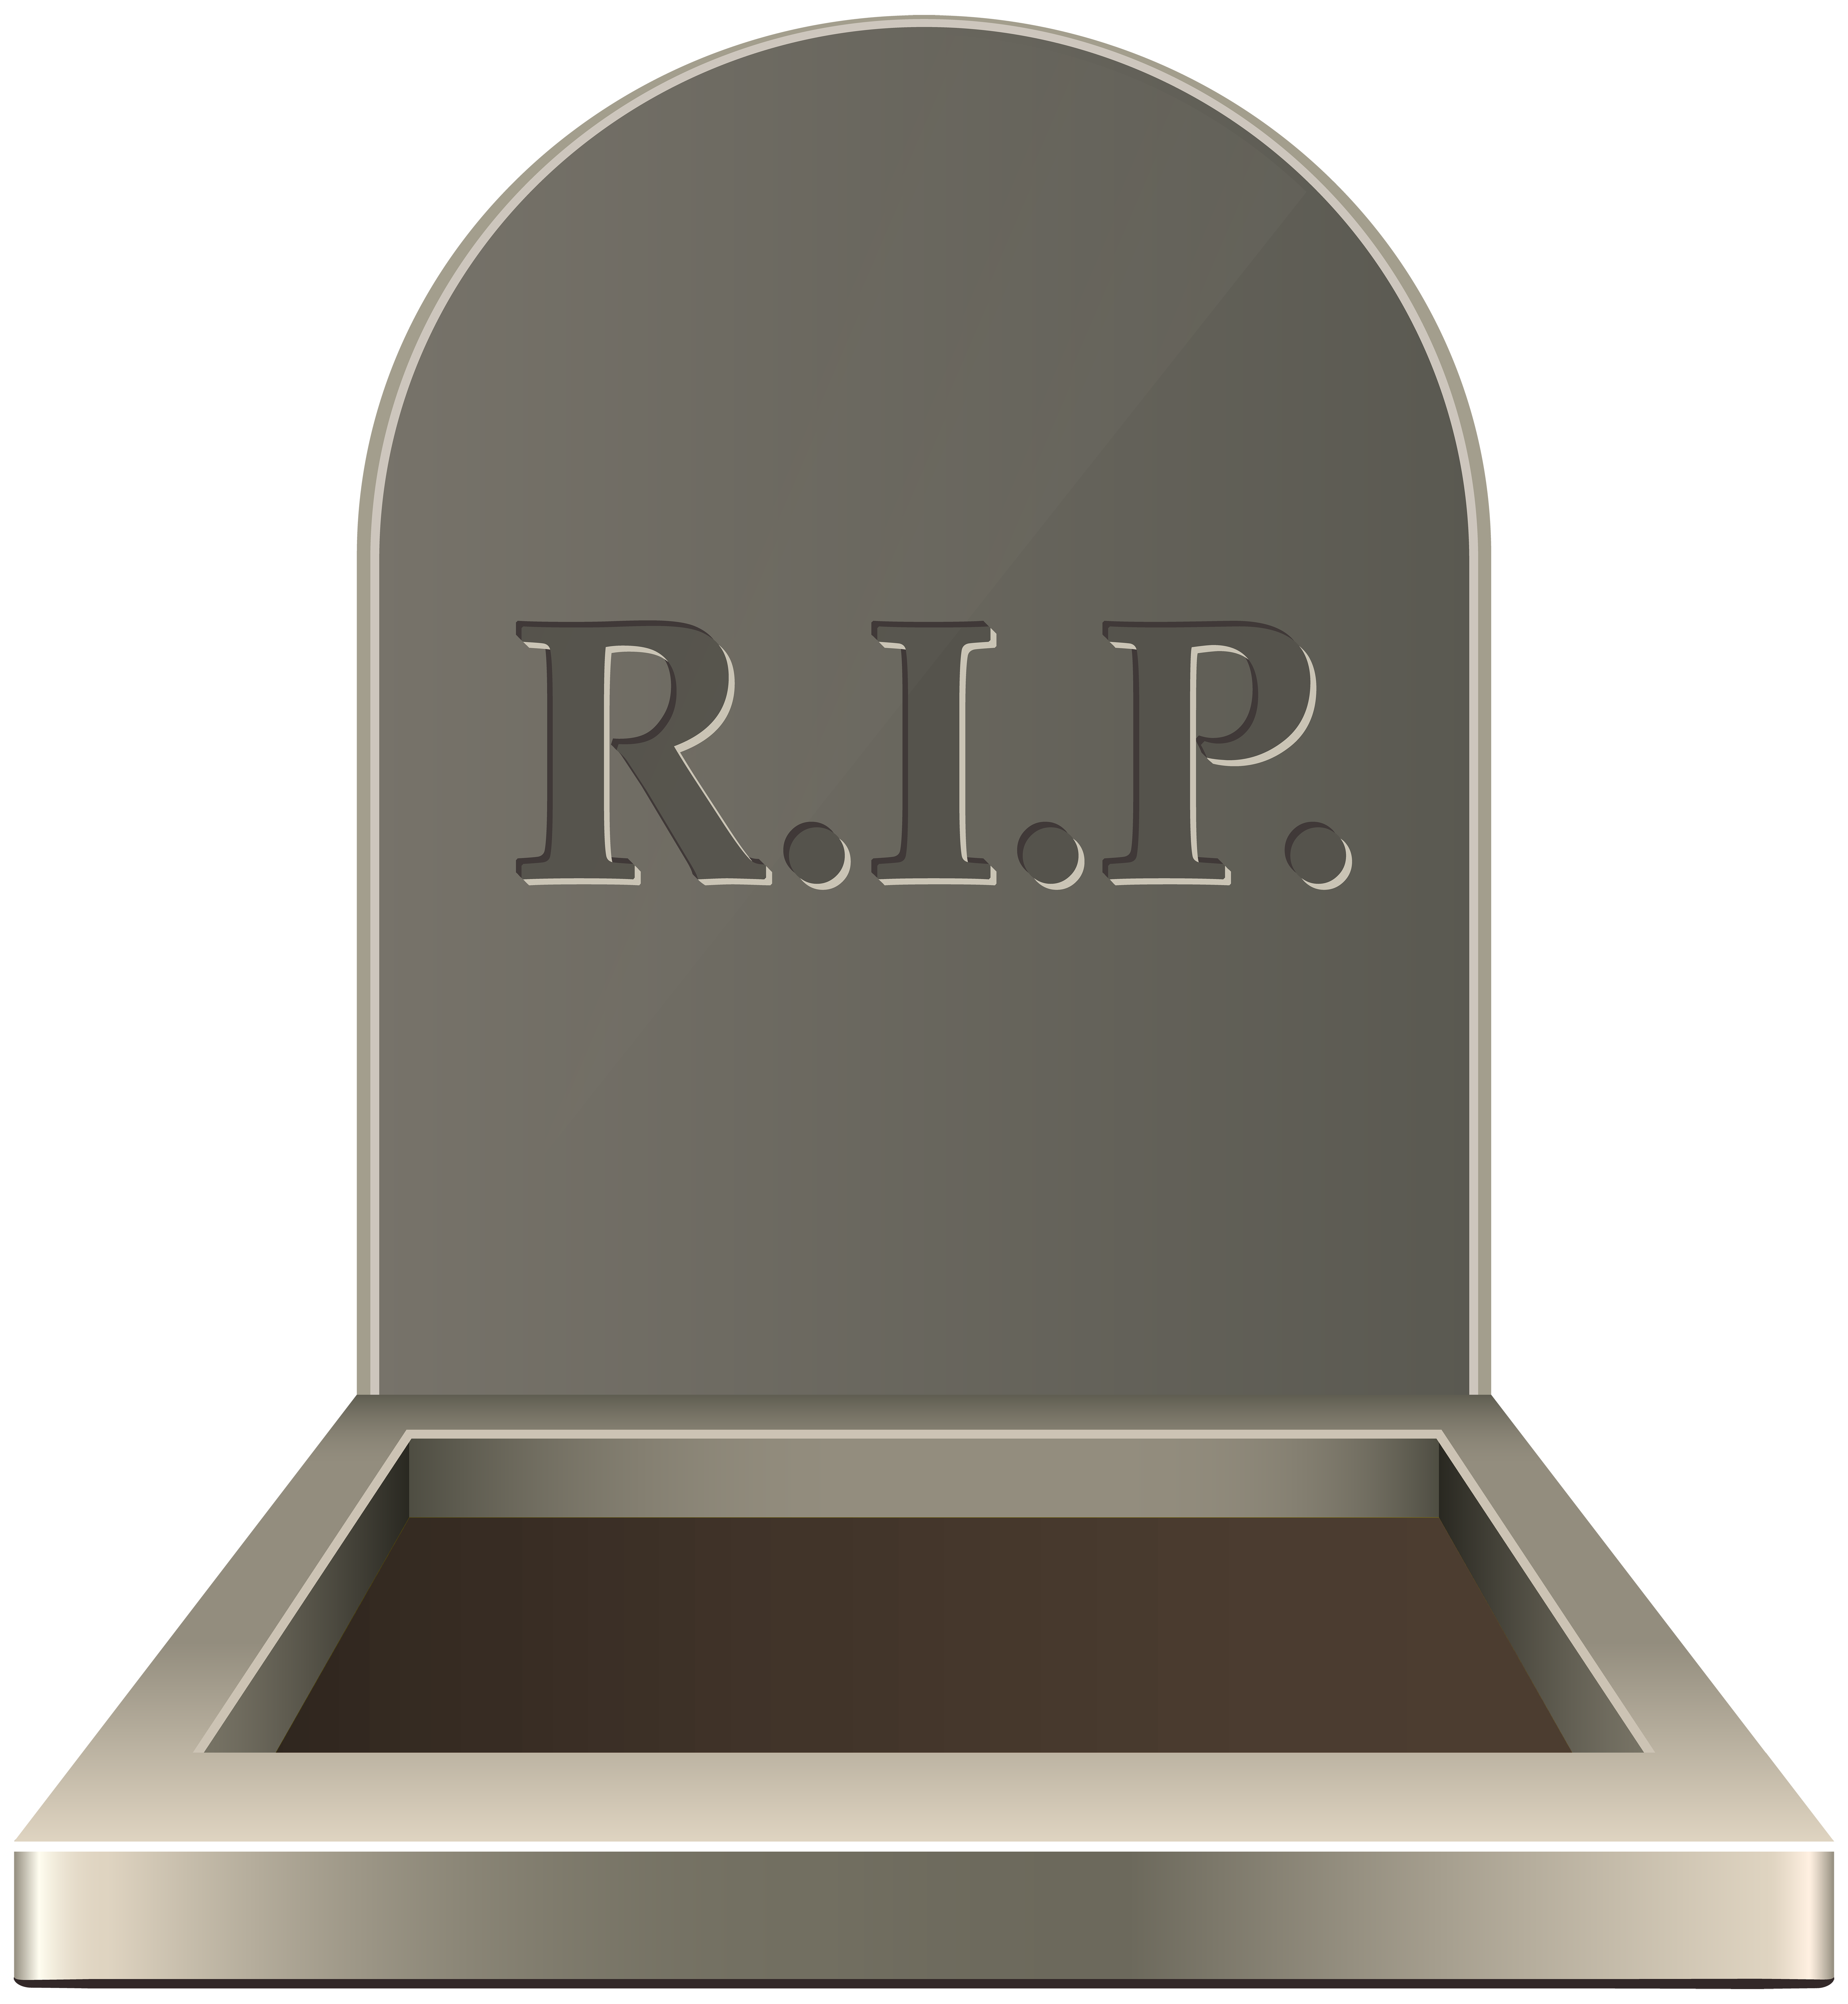 halloween RIP tombstone png download - 1630*2355 - Free Transparent  Halloween png Download. - CleanPNG / KissPNG